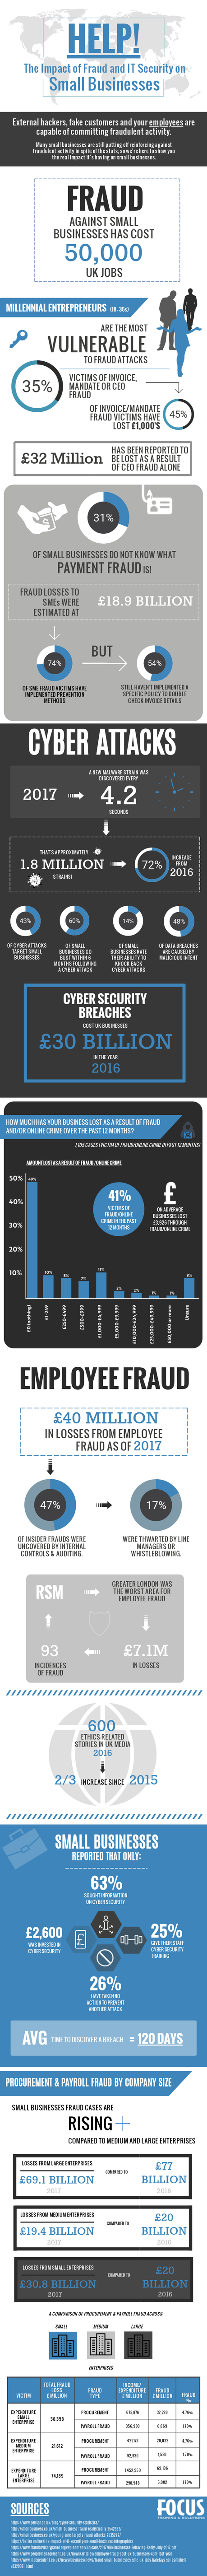 The Impact of Fraud and IT Security on Small Businesses – Infographic